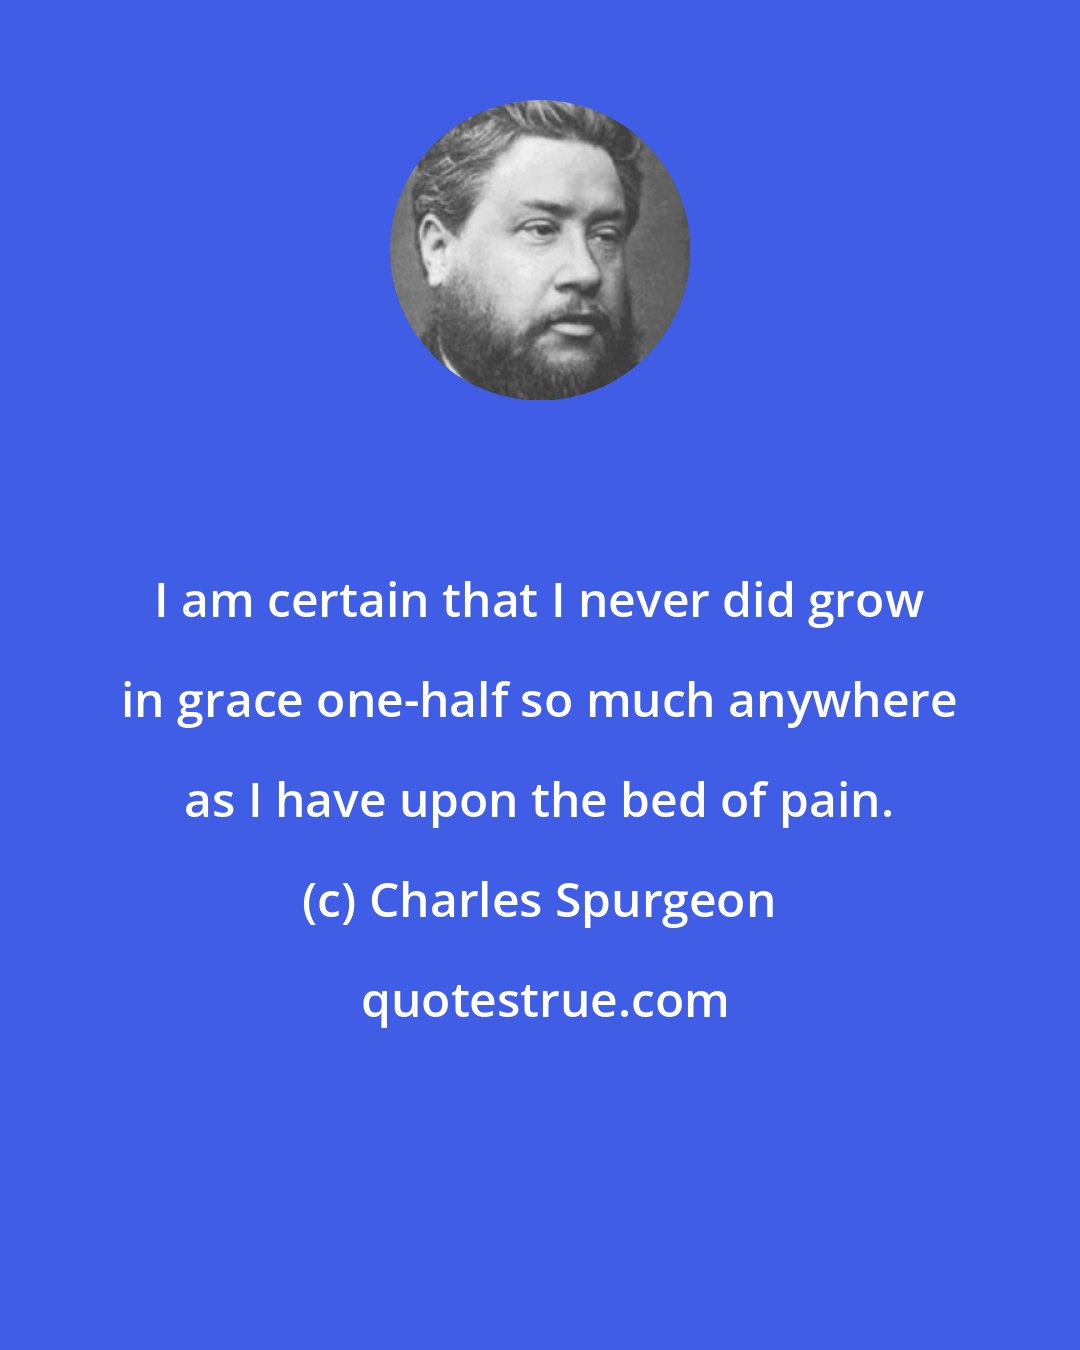 Charles Spurgeon: I am certain that I never did grow in grace one-half so much anywhere as I have upon the bed of pain.